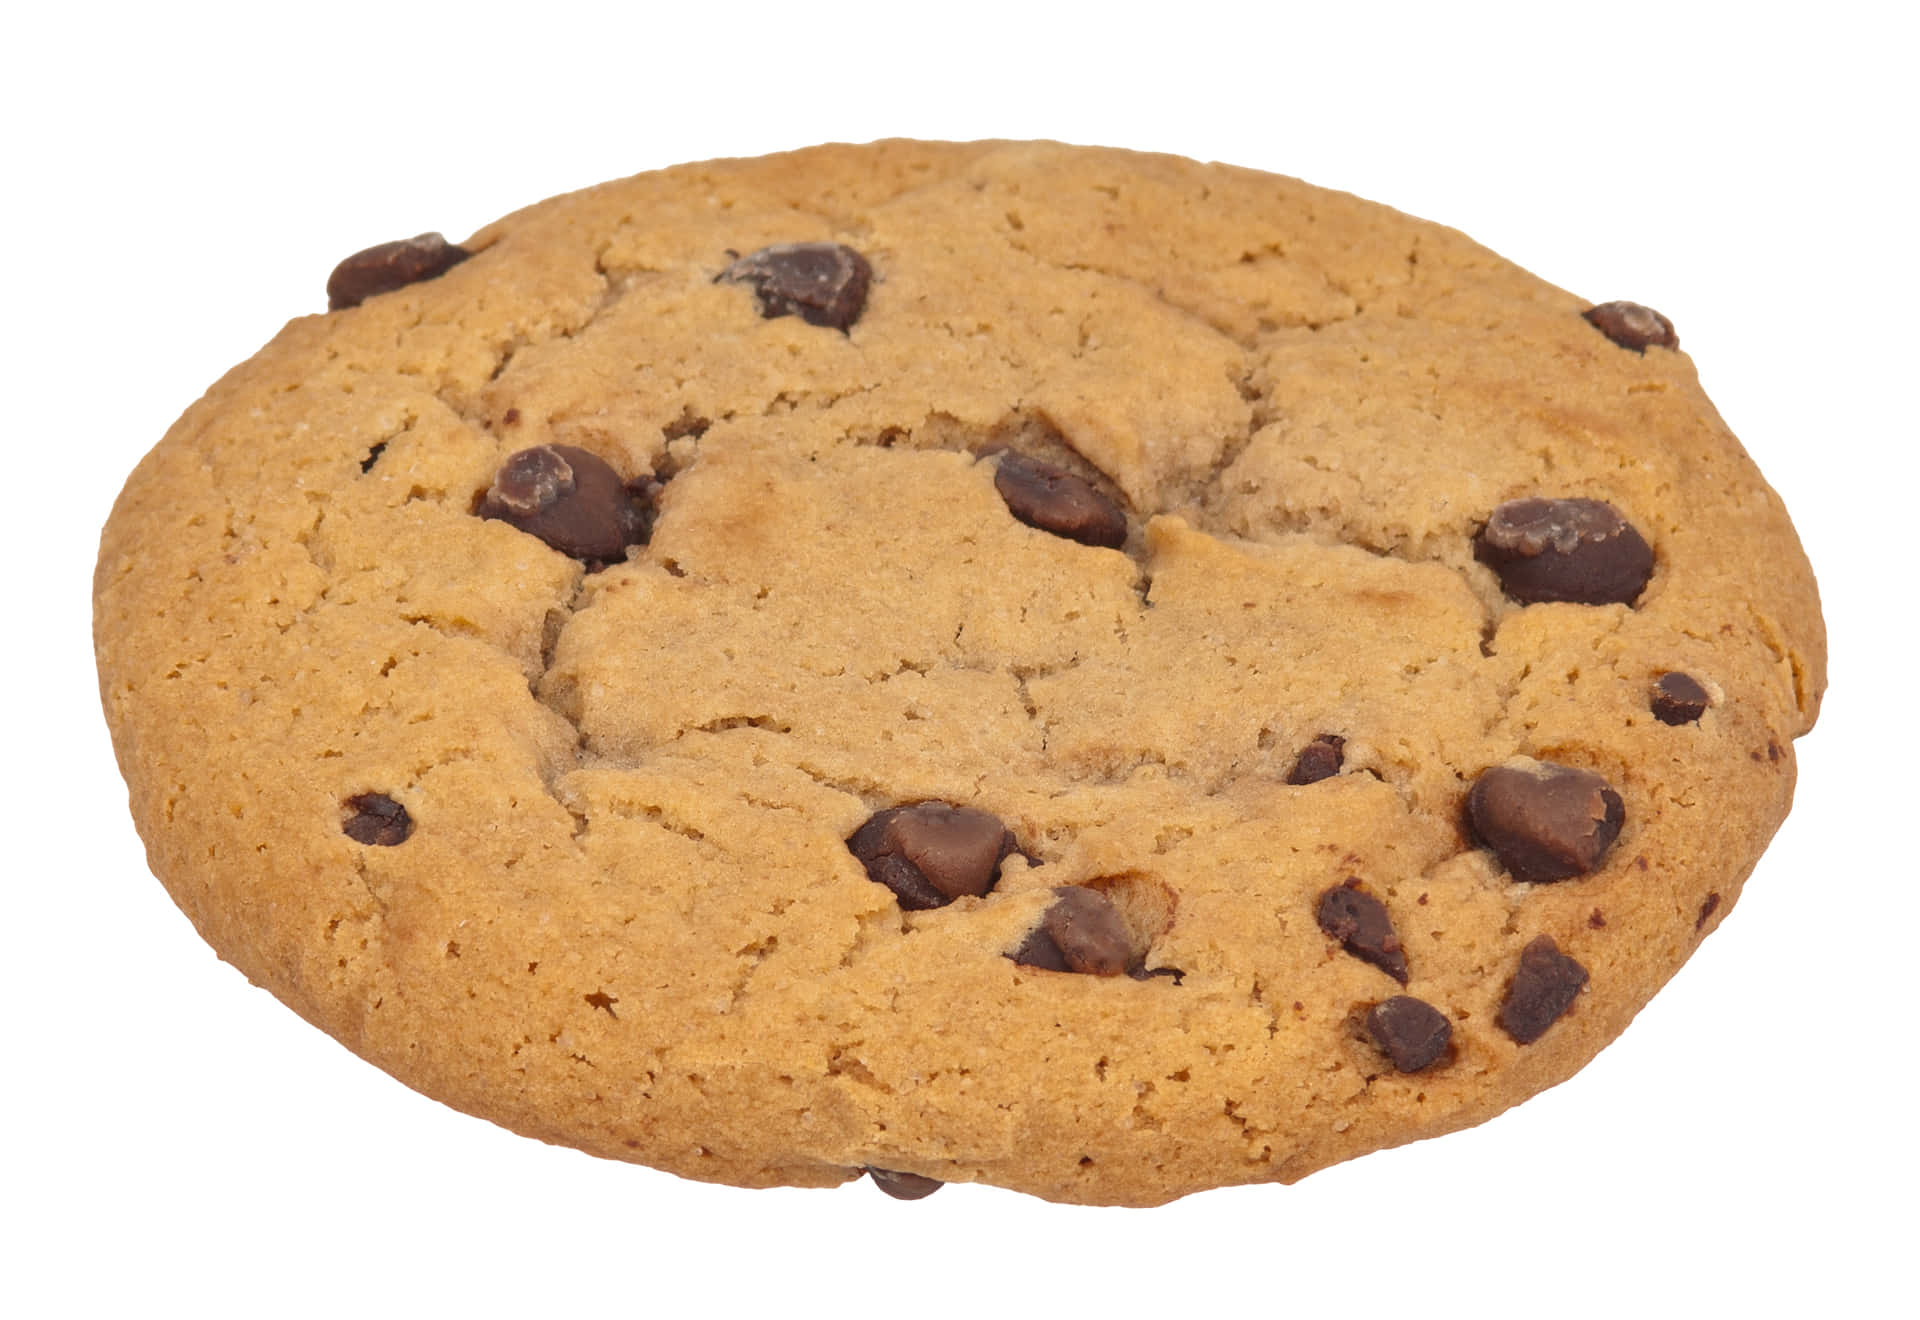 A Chocolate Chip Cookie On A White Background